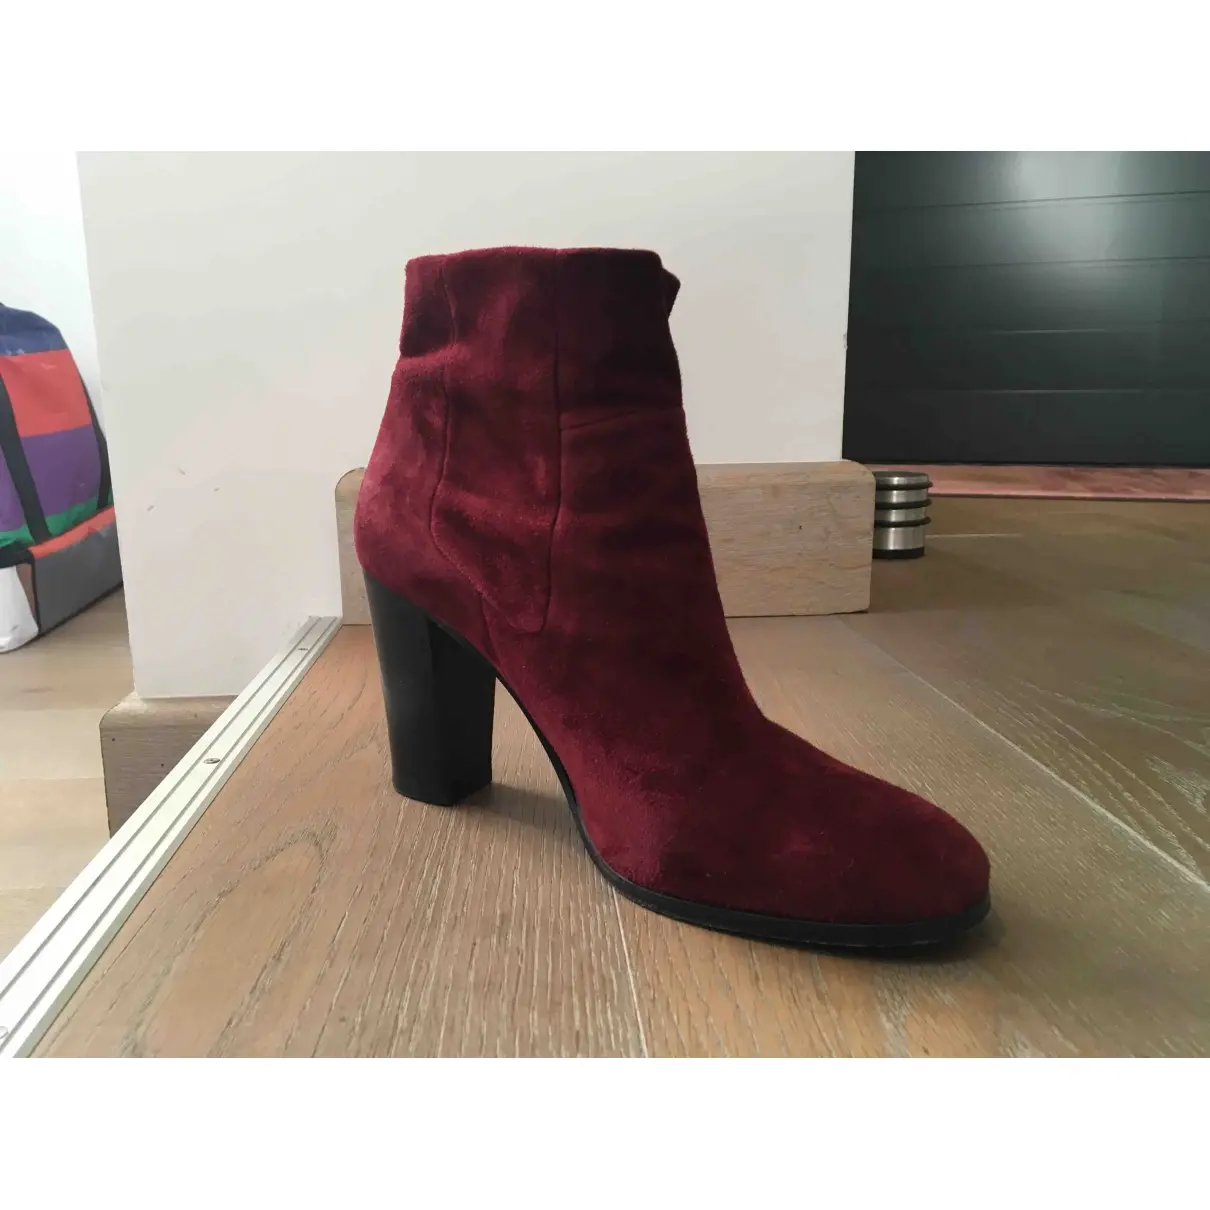 Stouls Ankle boots for sale